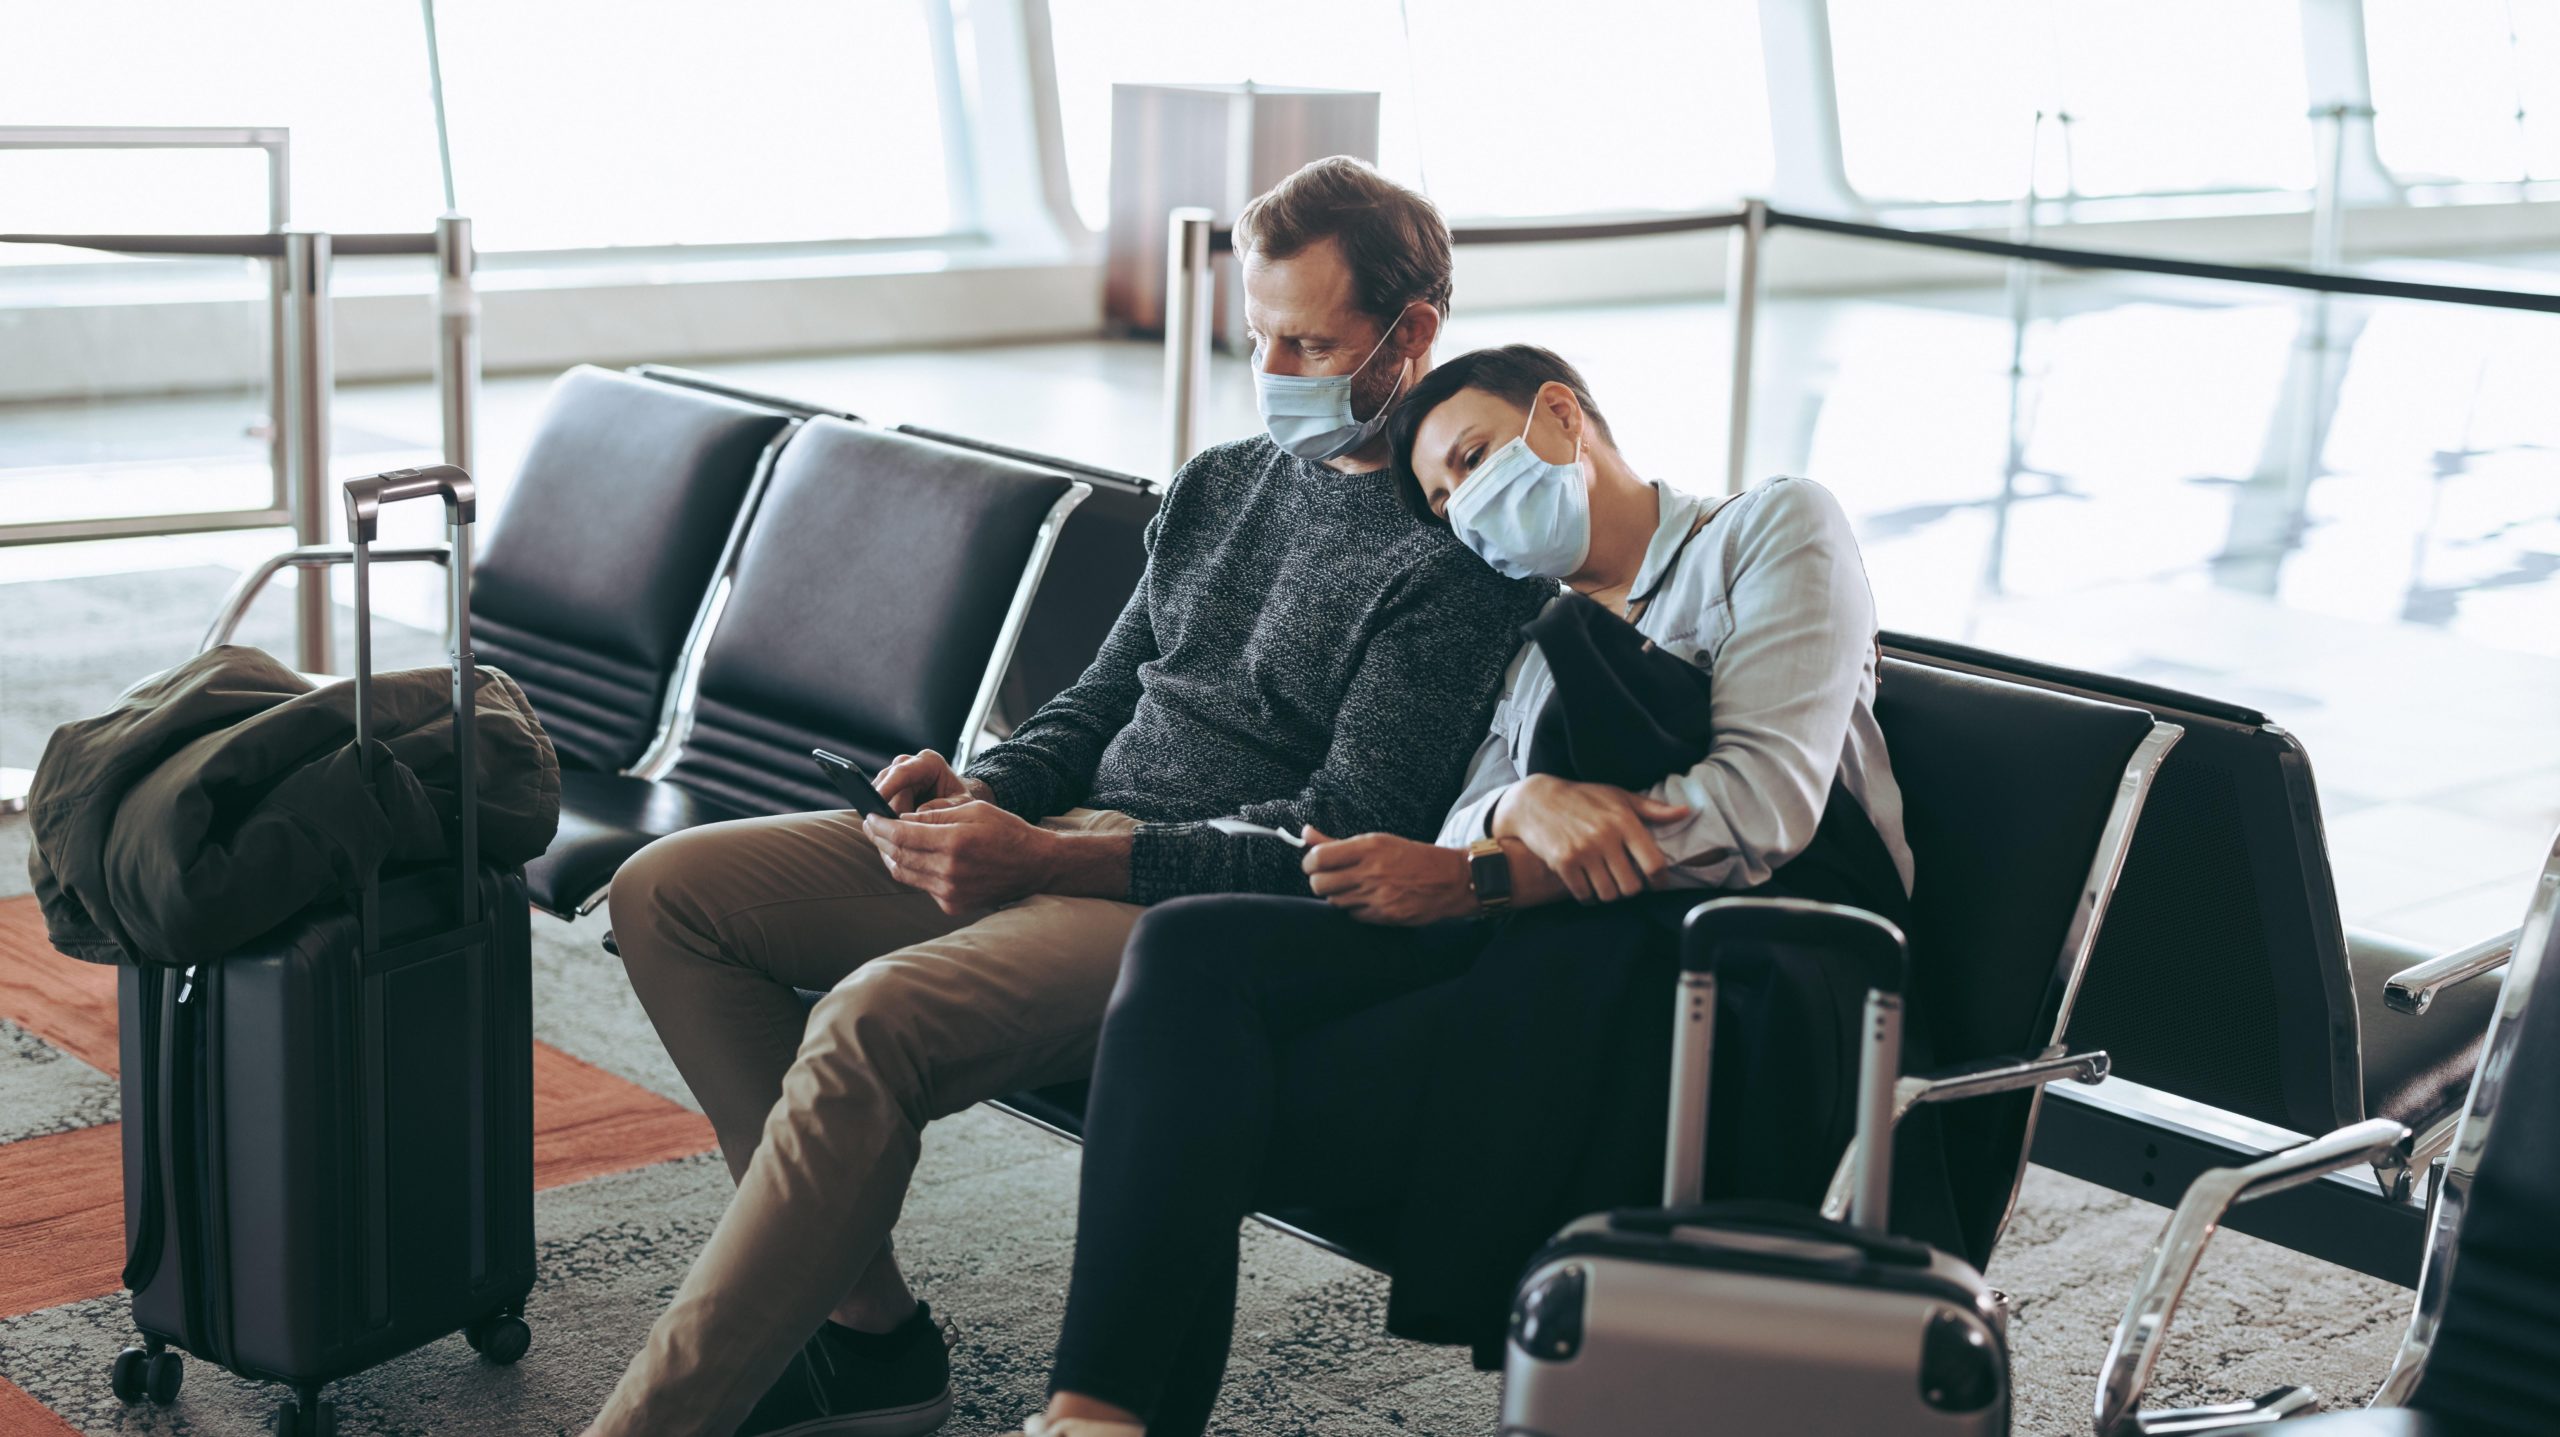 How to Travel With Your Partner for the First Time Without Ruining Your Relationship